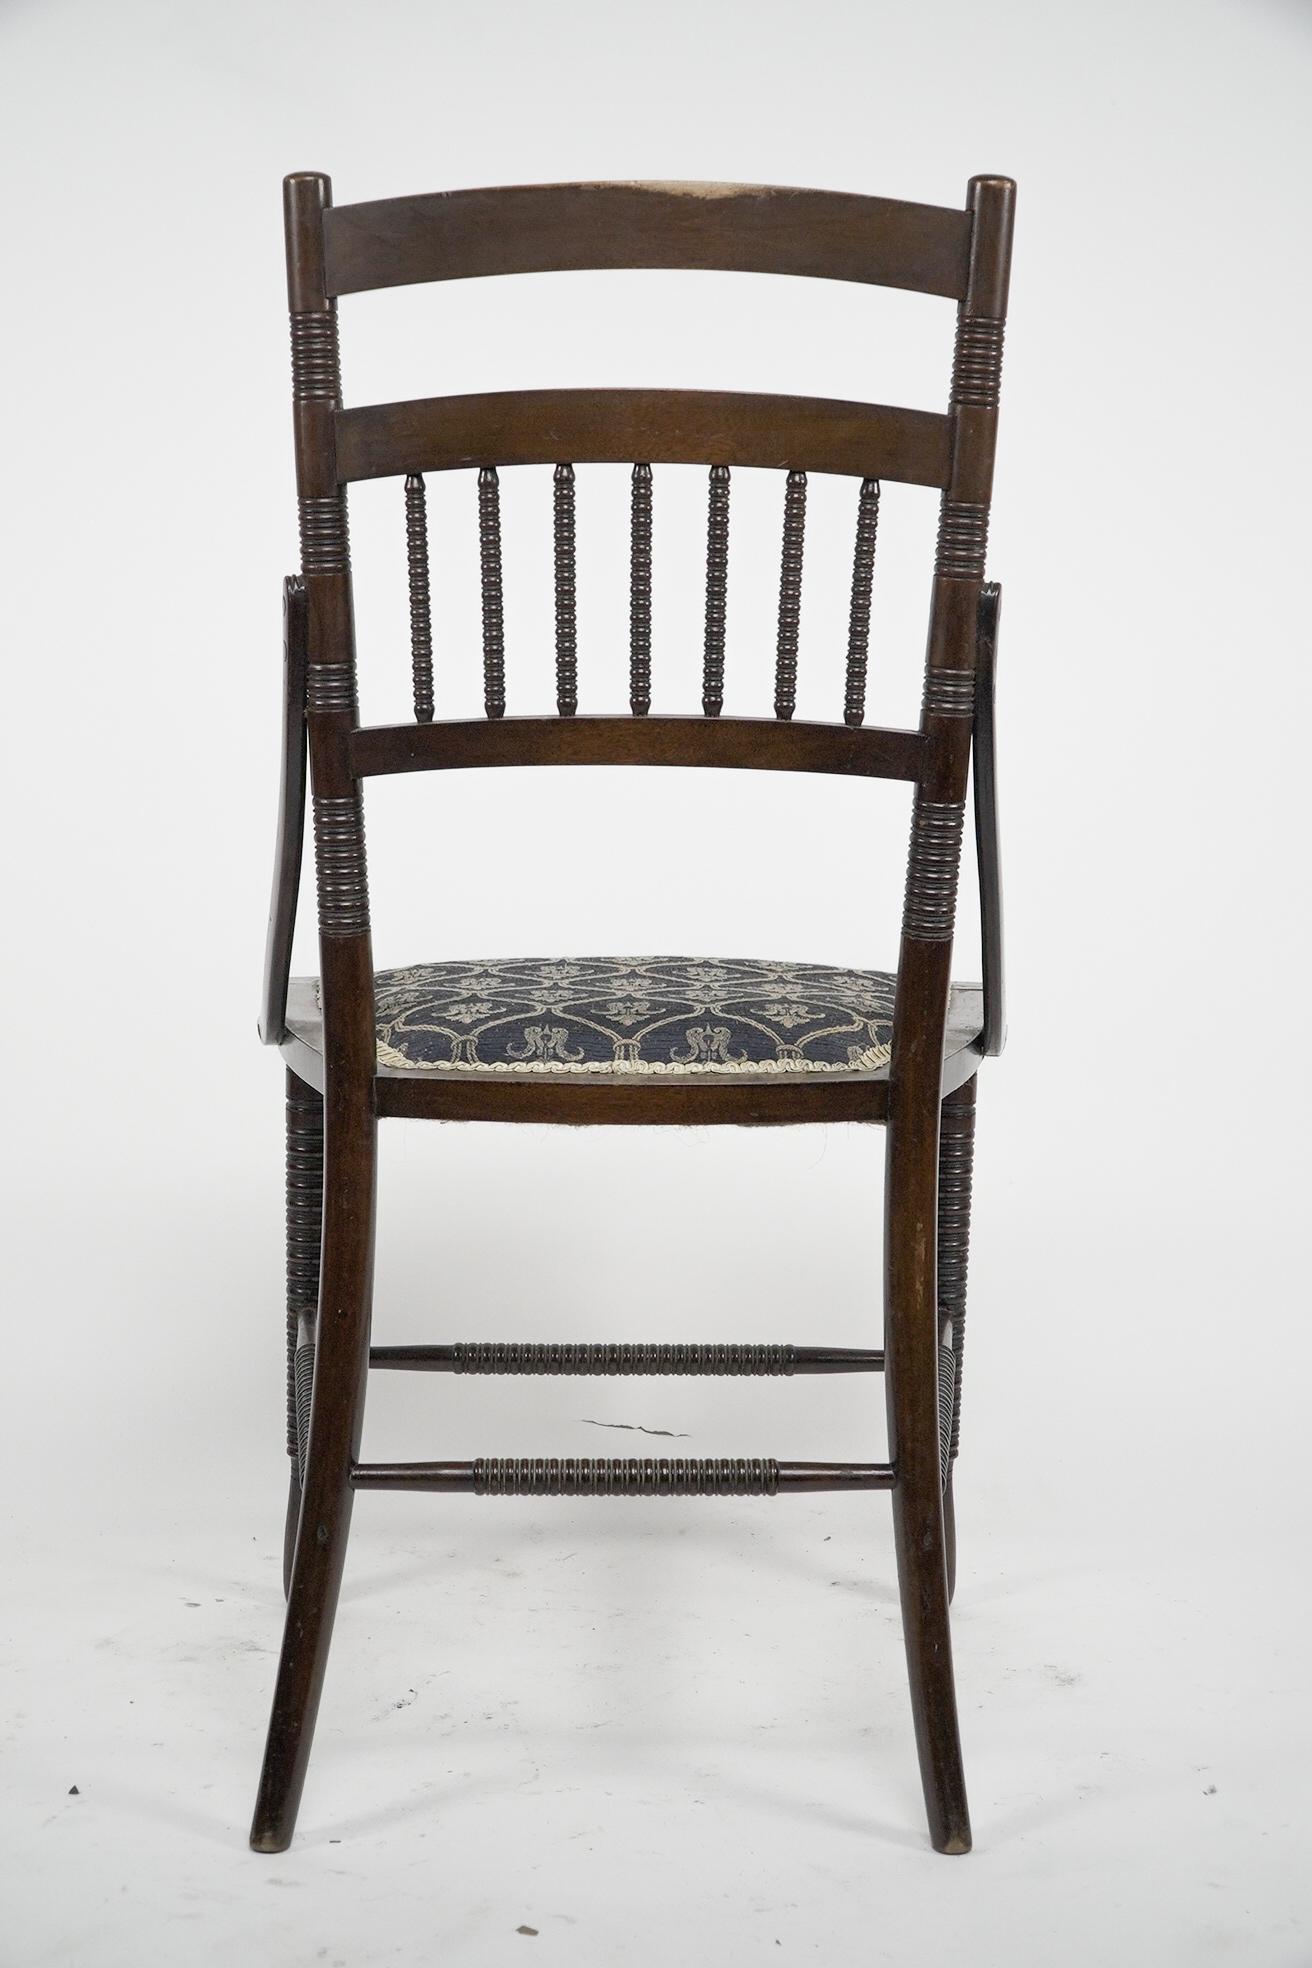 R. W. Edis, probably made by Jackson & Graham A fine pair of Walnut side chairs For Sale 13